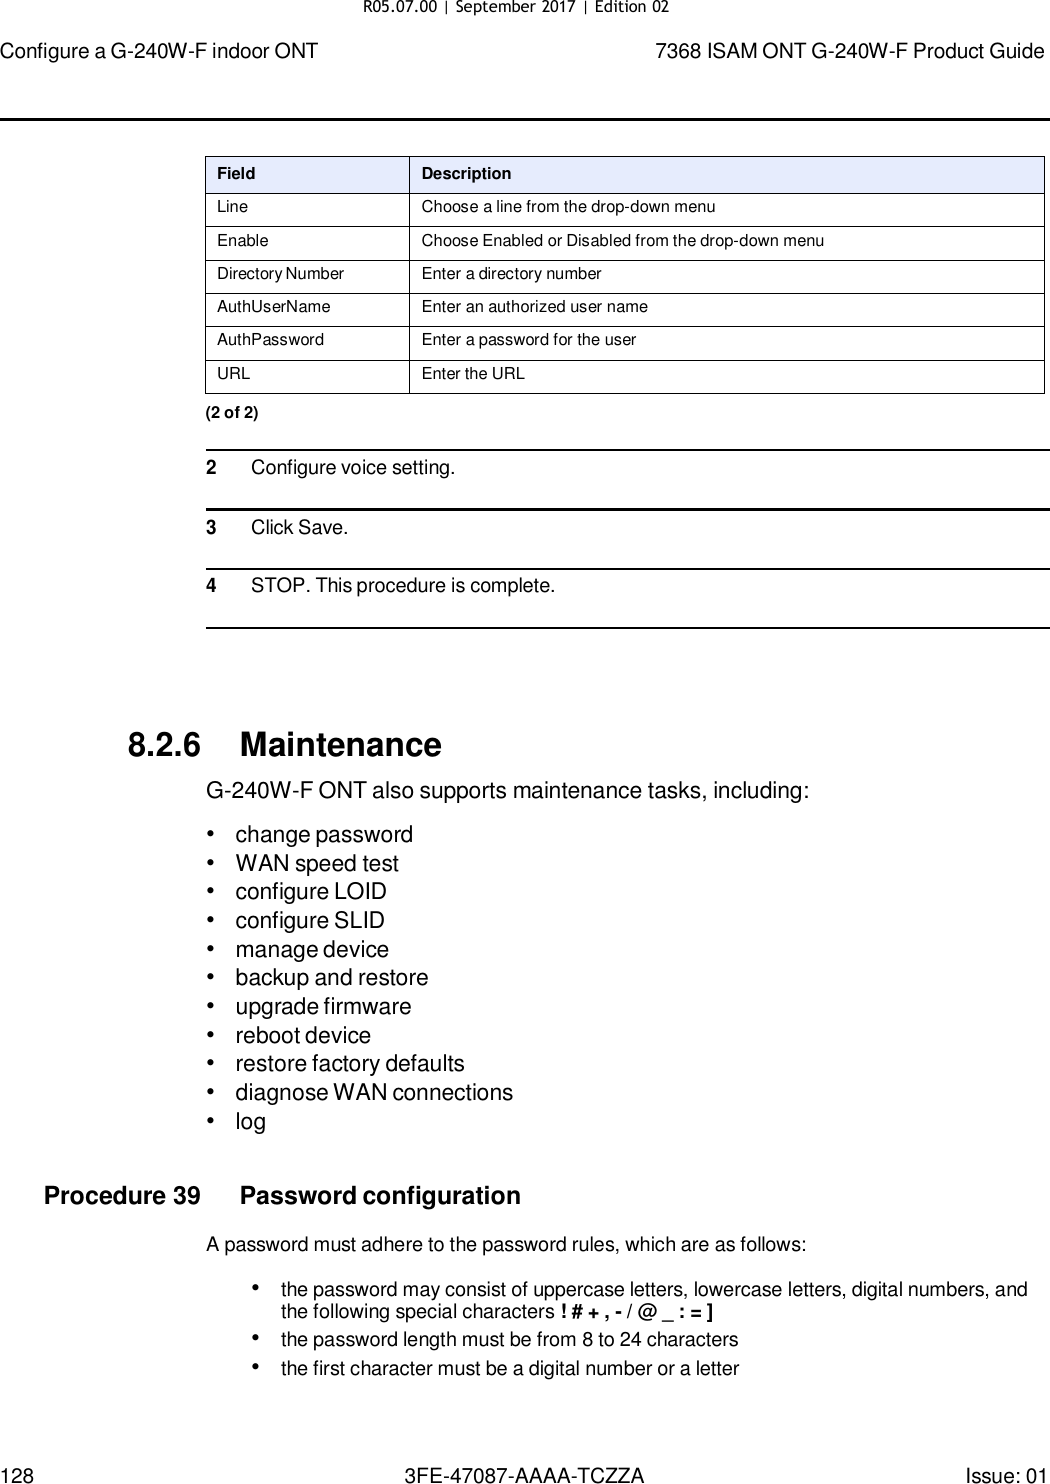 Page 122 of Nokia Bell G240WFV2 7368 ISAM GPON ONU User Manual 7368 ISAM ONT G 240W F Product Guide